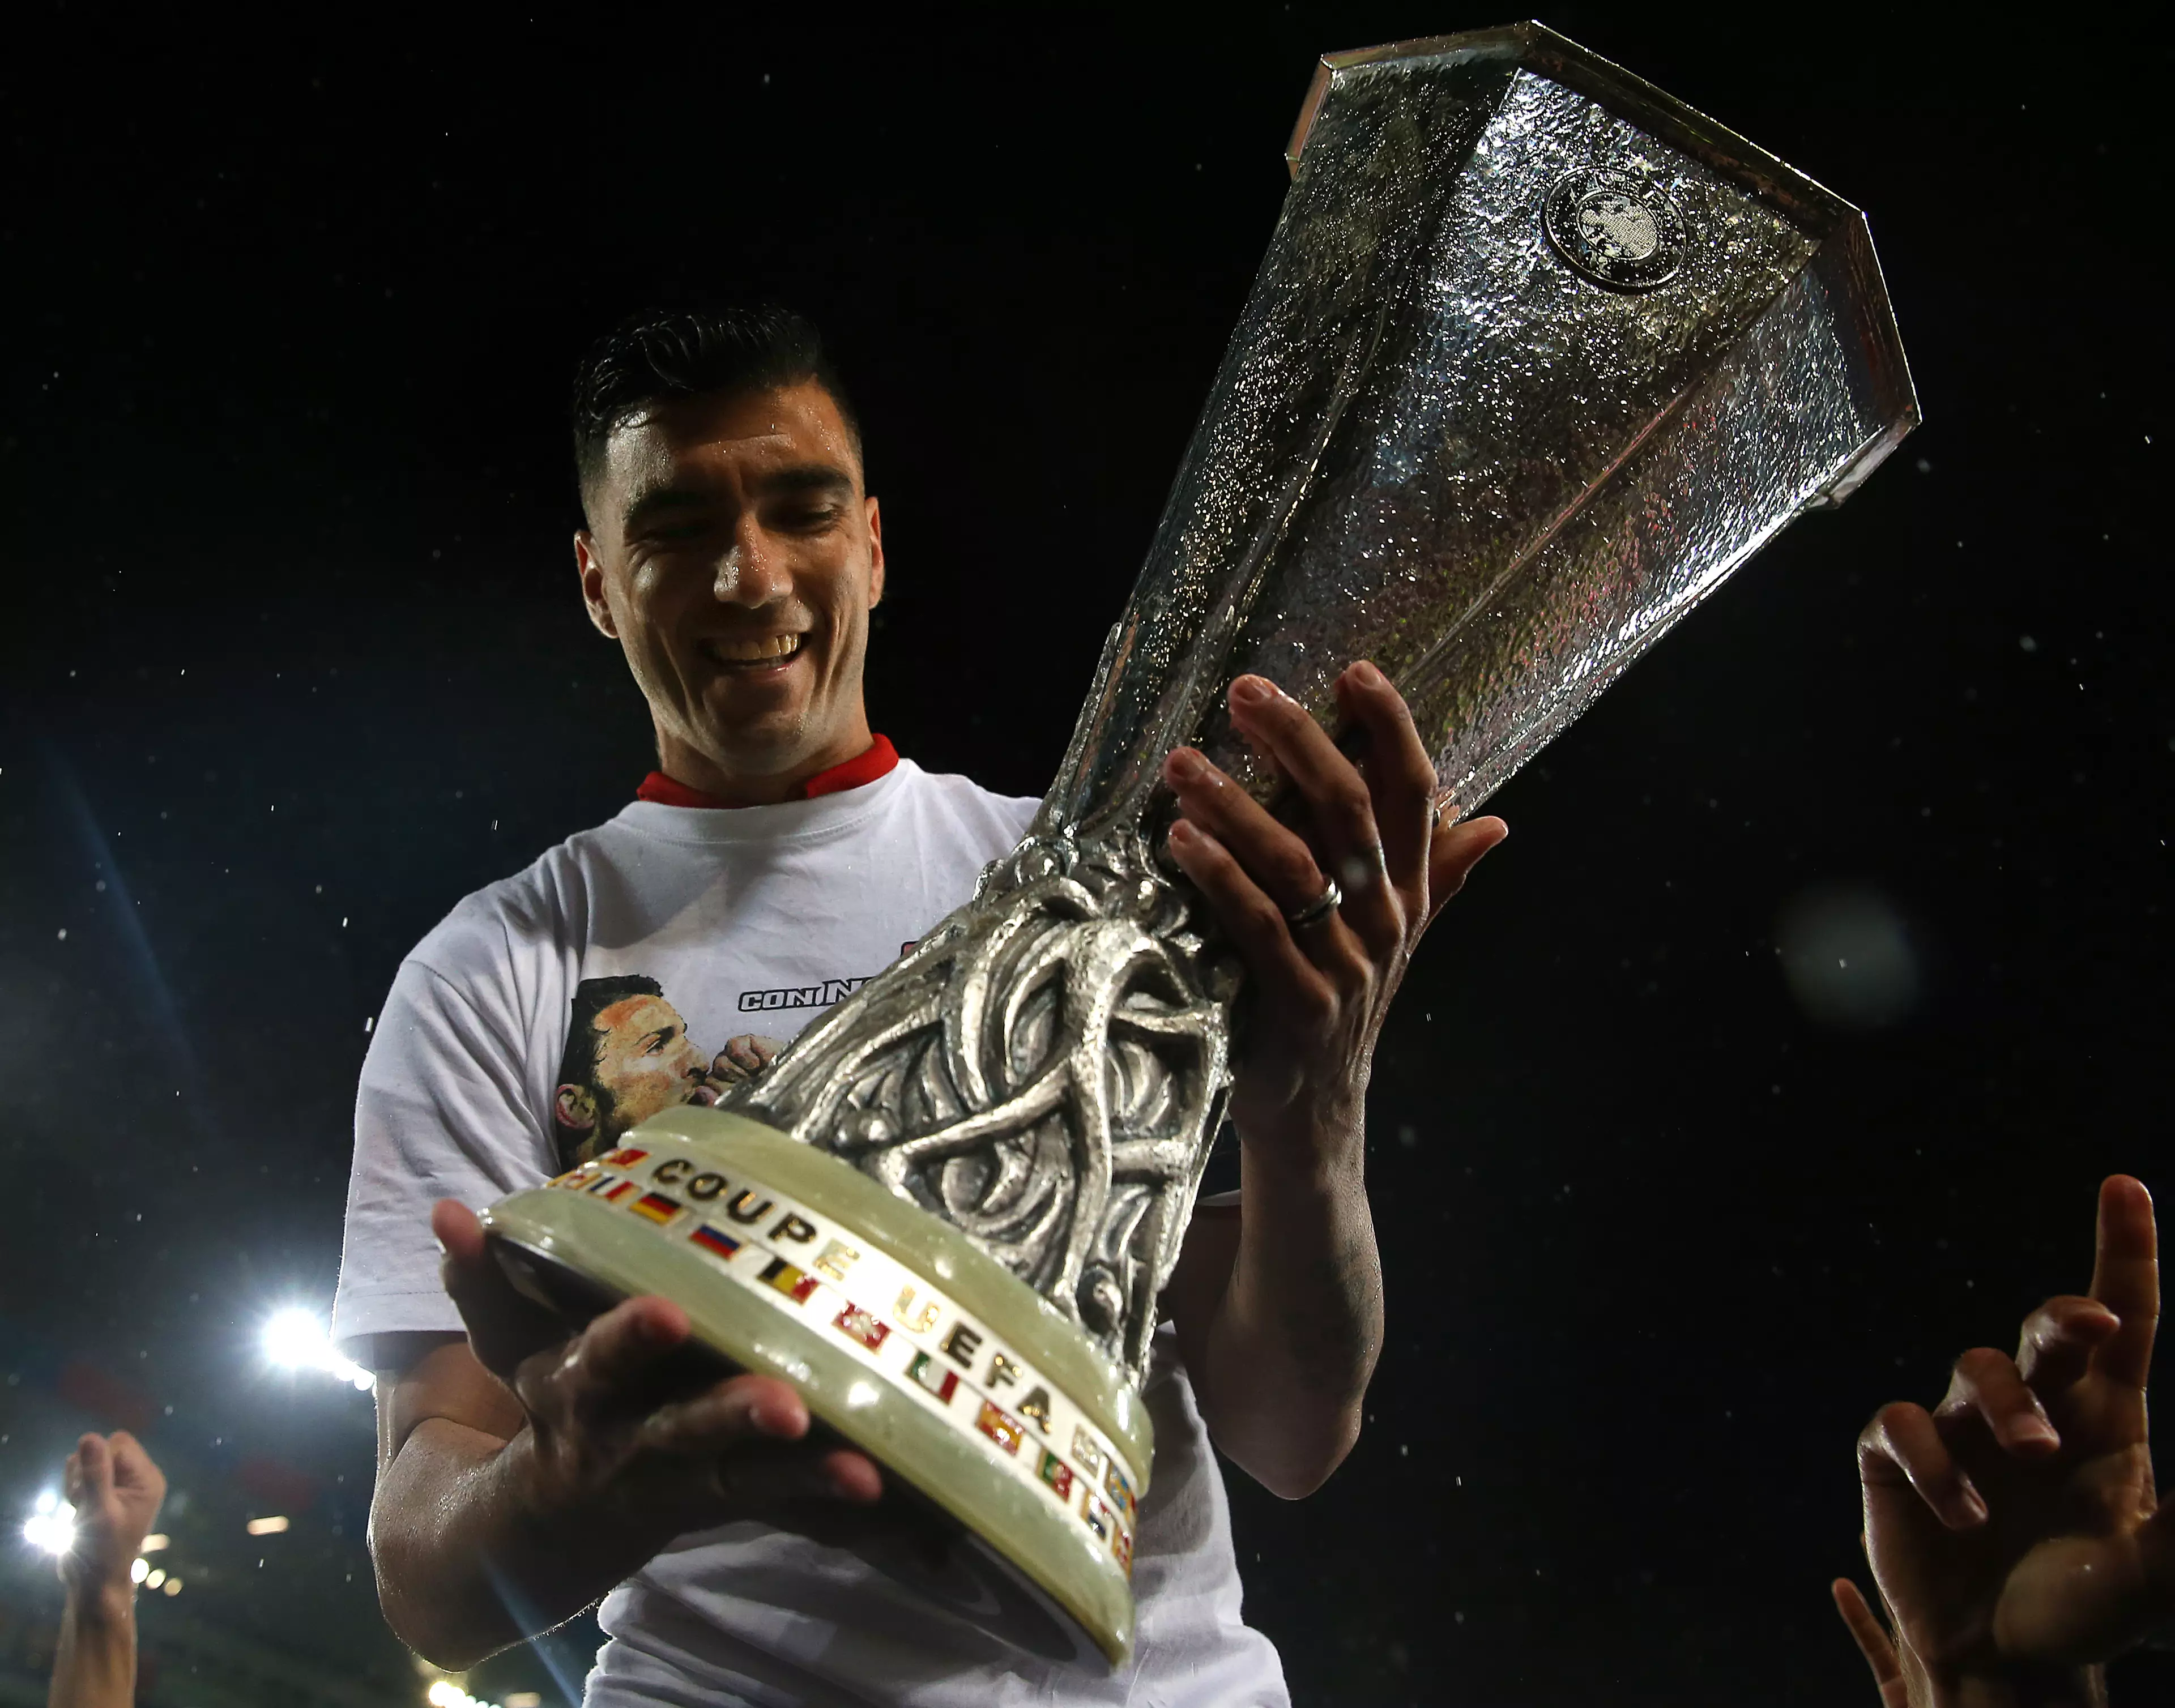 Reyes won the Europa League five times in his career. Image: PA Images